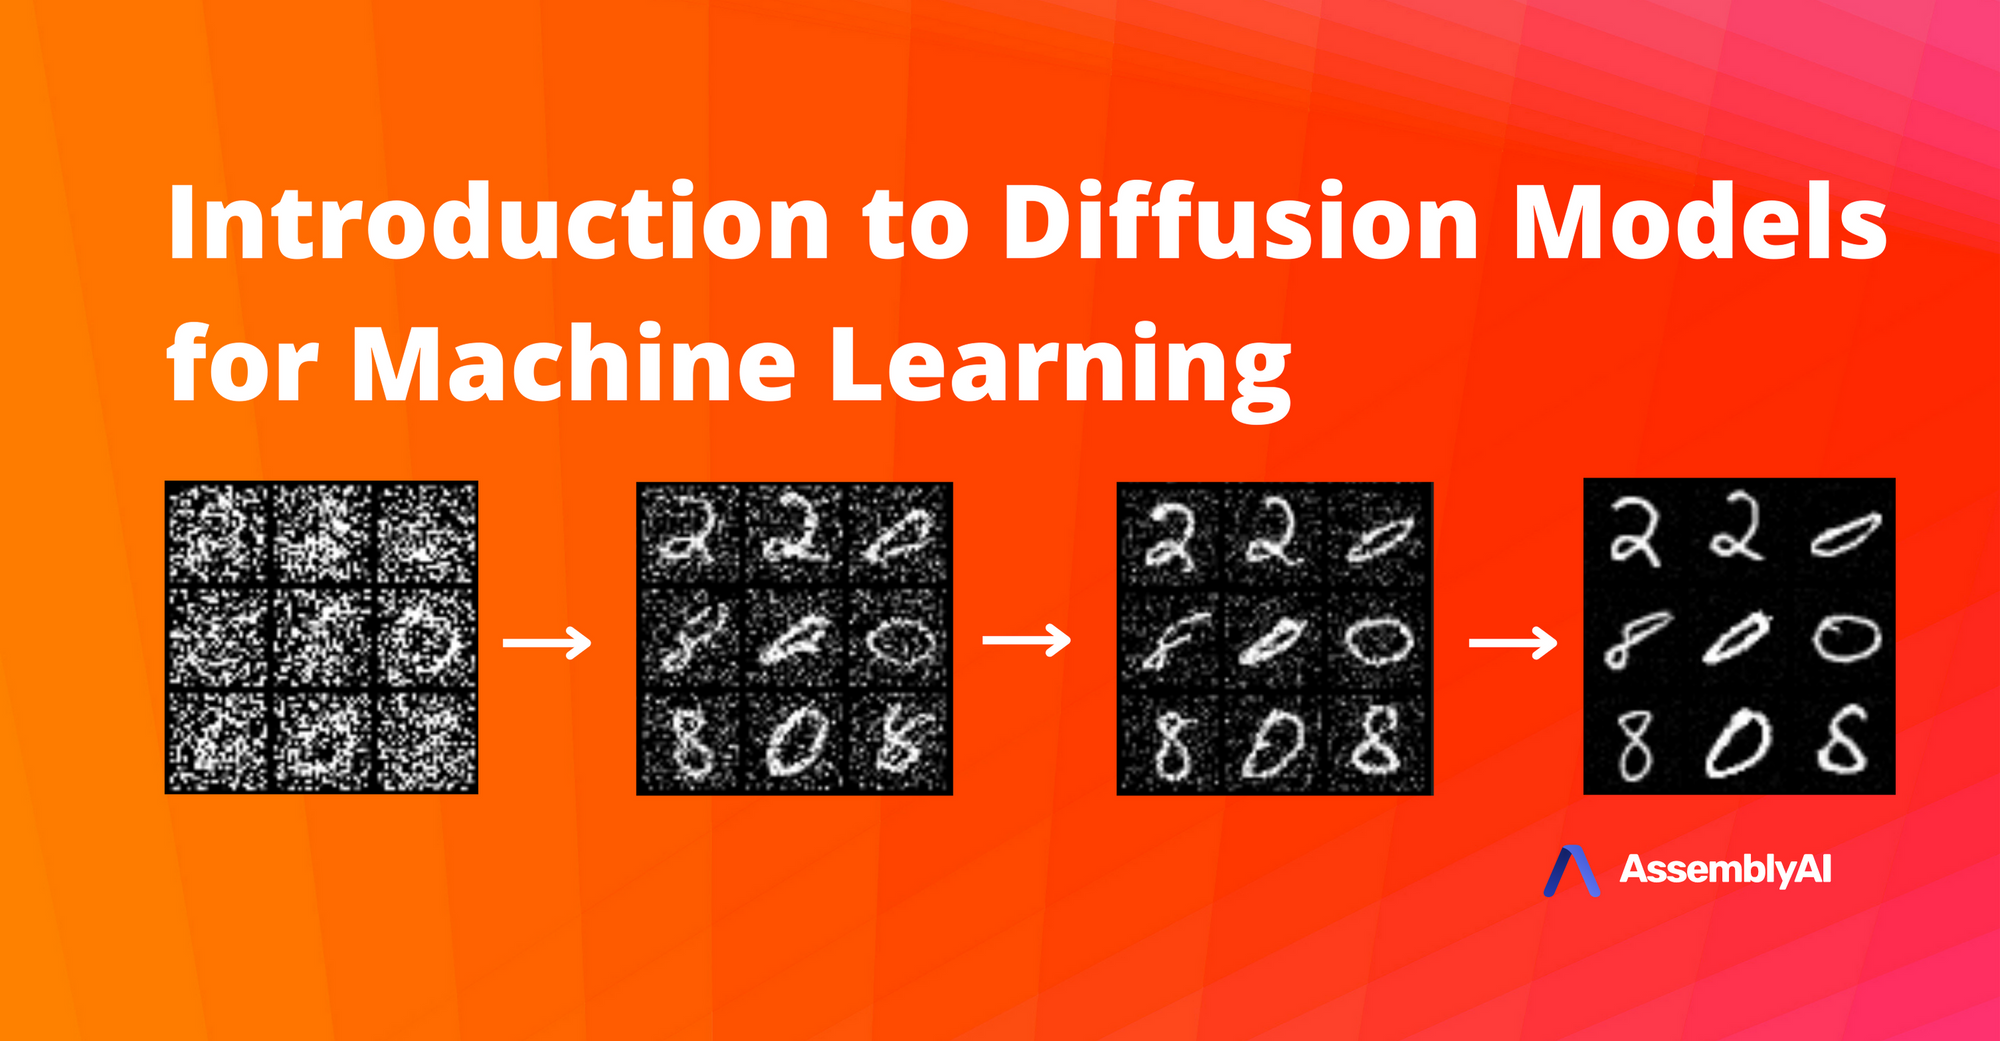 The meteoric rise of Diffusion Models is one of the biggest developments in Machine Learning in the past several years. Learn everything you need to k